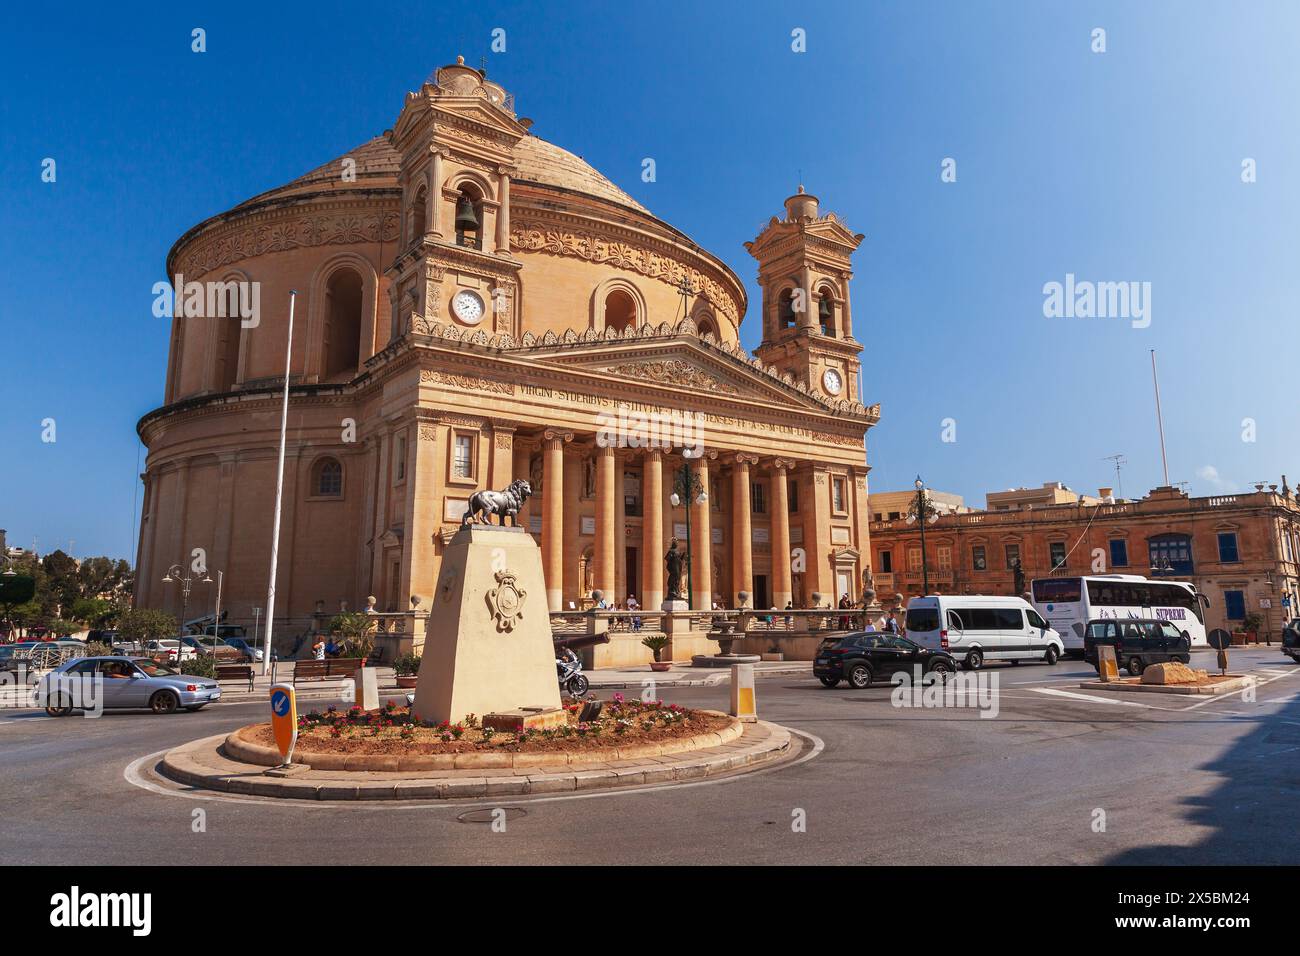 Mosta, Malta - August 25, 2019: Rotunda of Mosta. Exterior of Sanctuary Basilica of the Assumption of Our Lady. Street view with people and cars on th Stock Photo